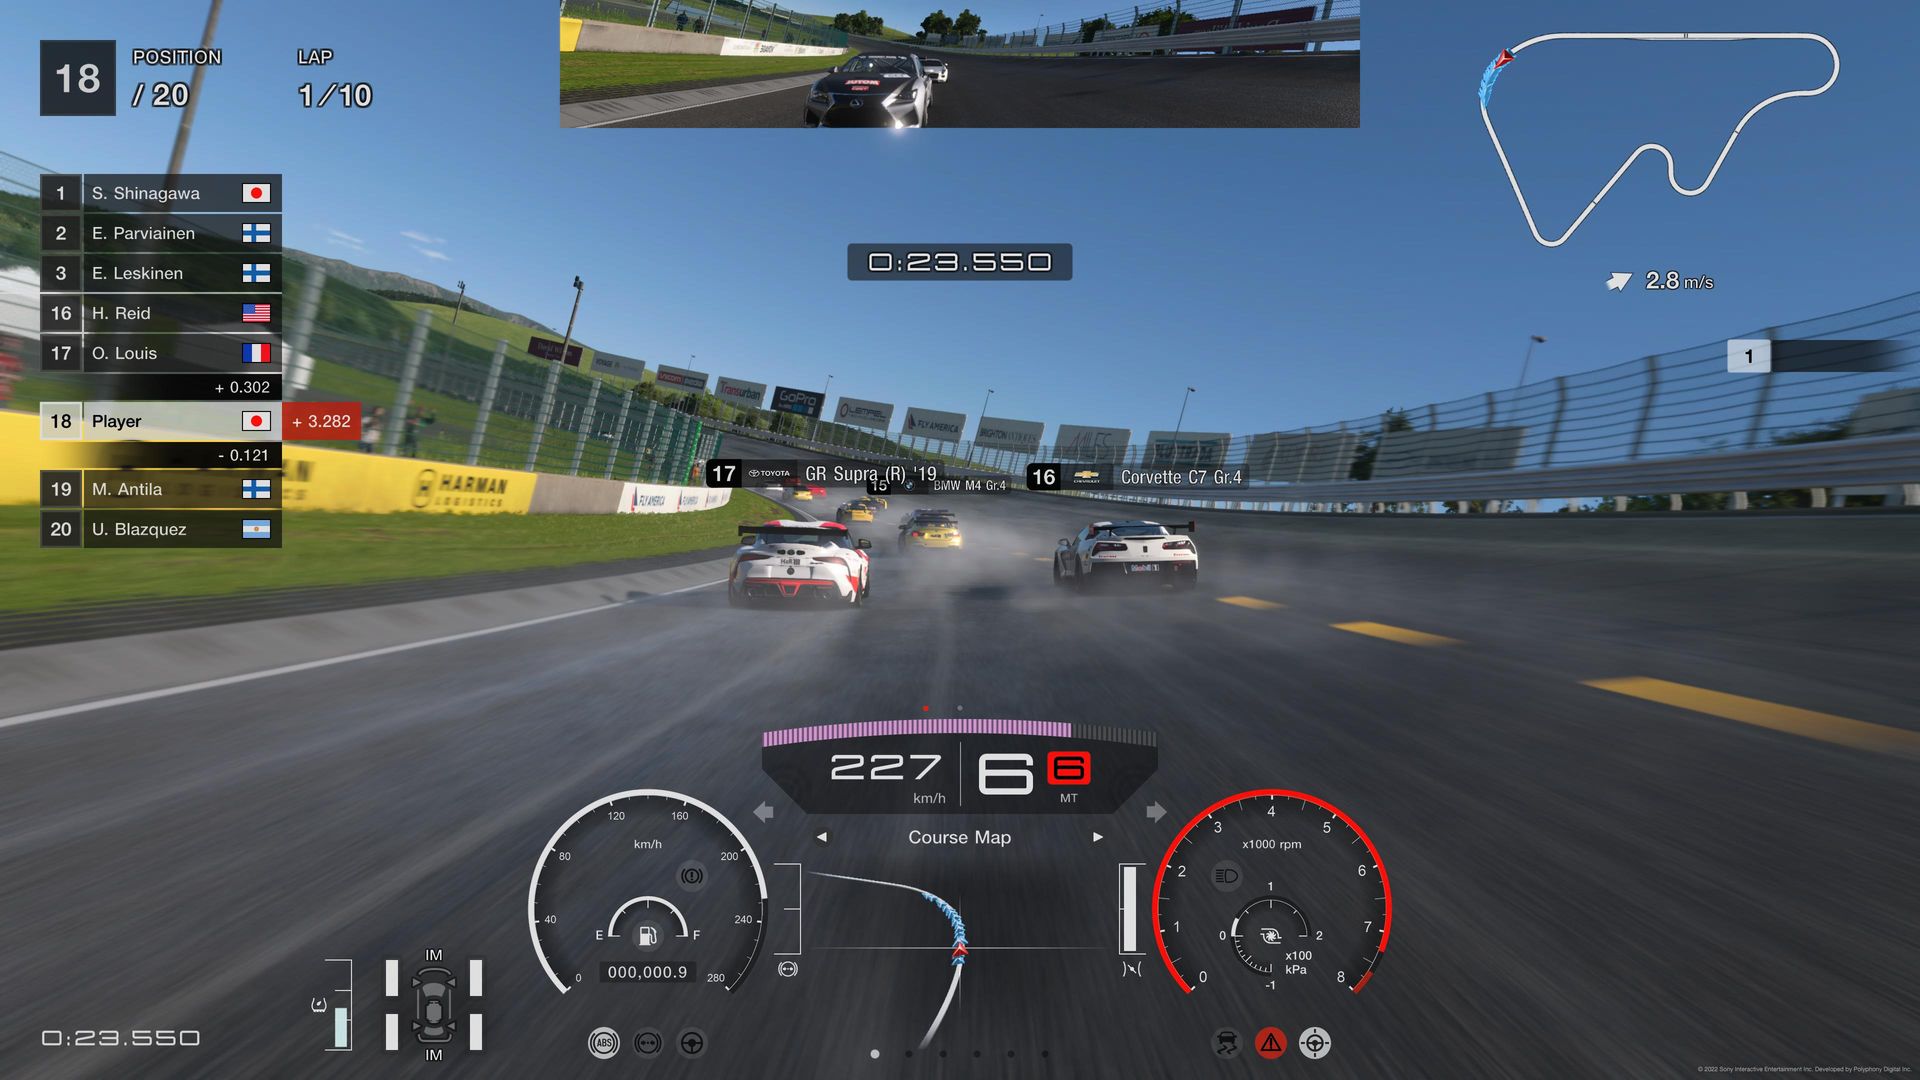 Gran Turismo: Transforming the Racing Video Game Landscape